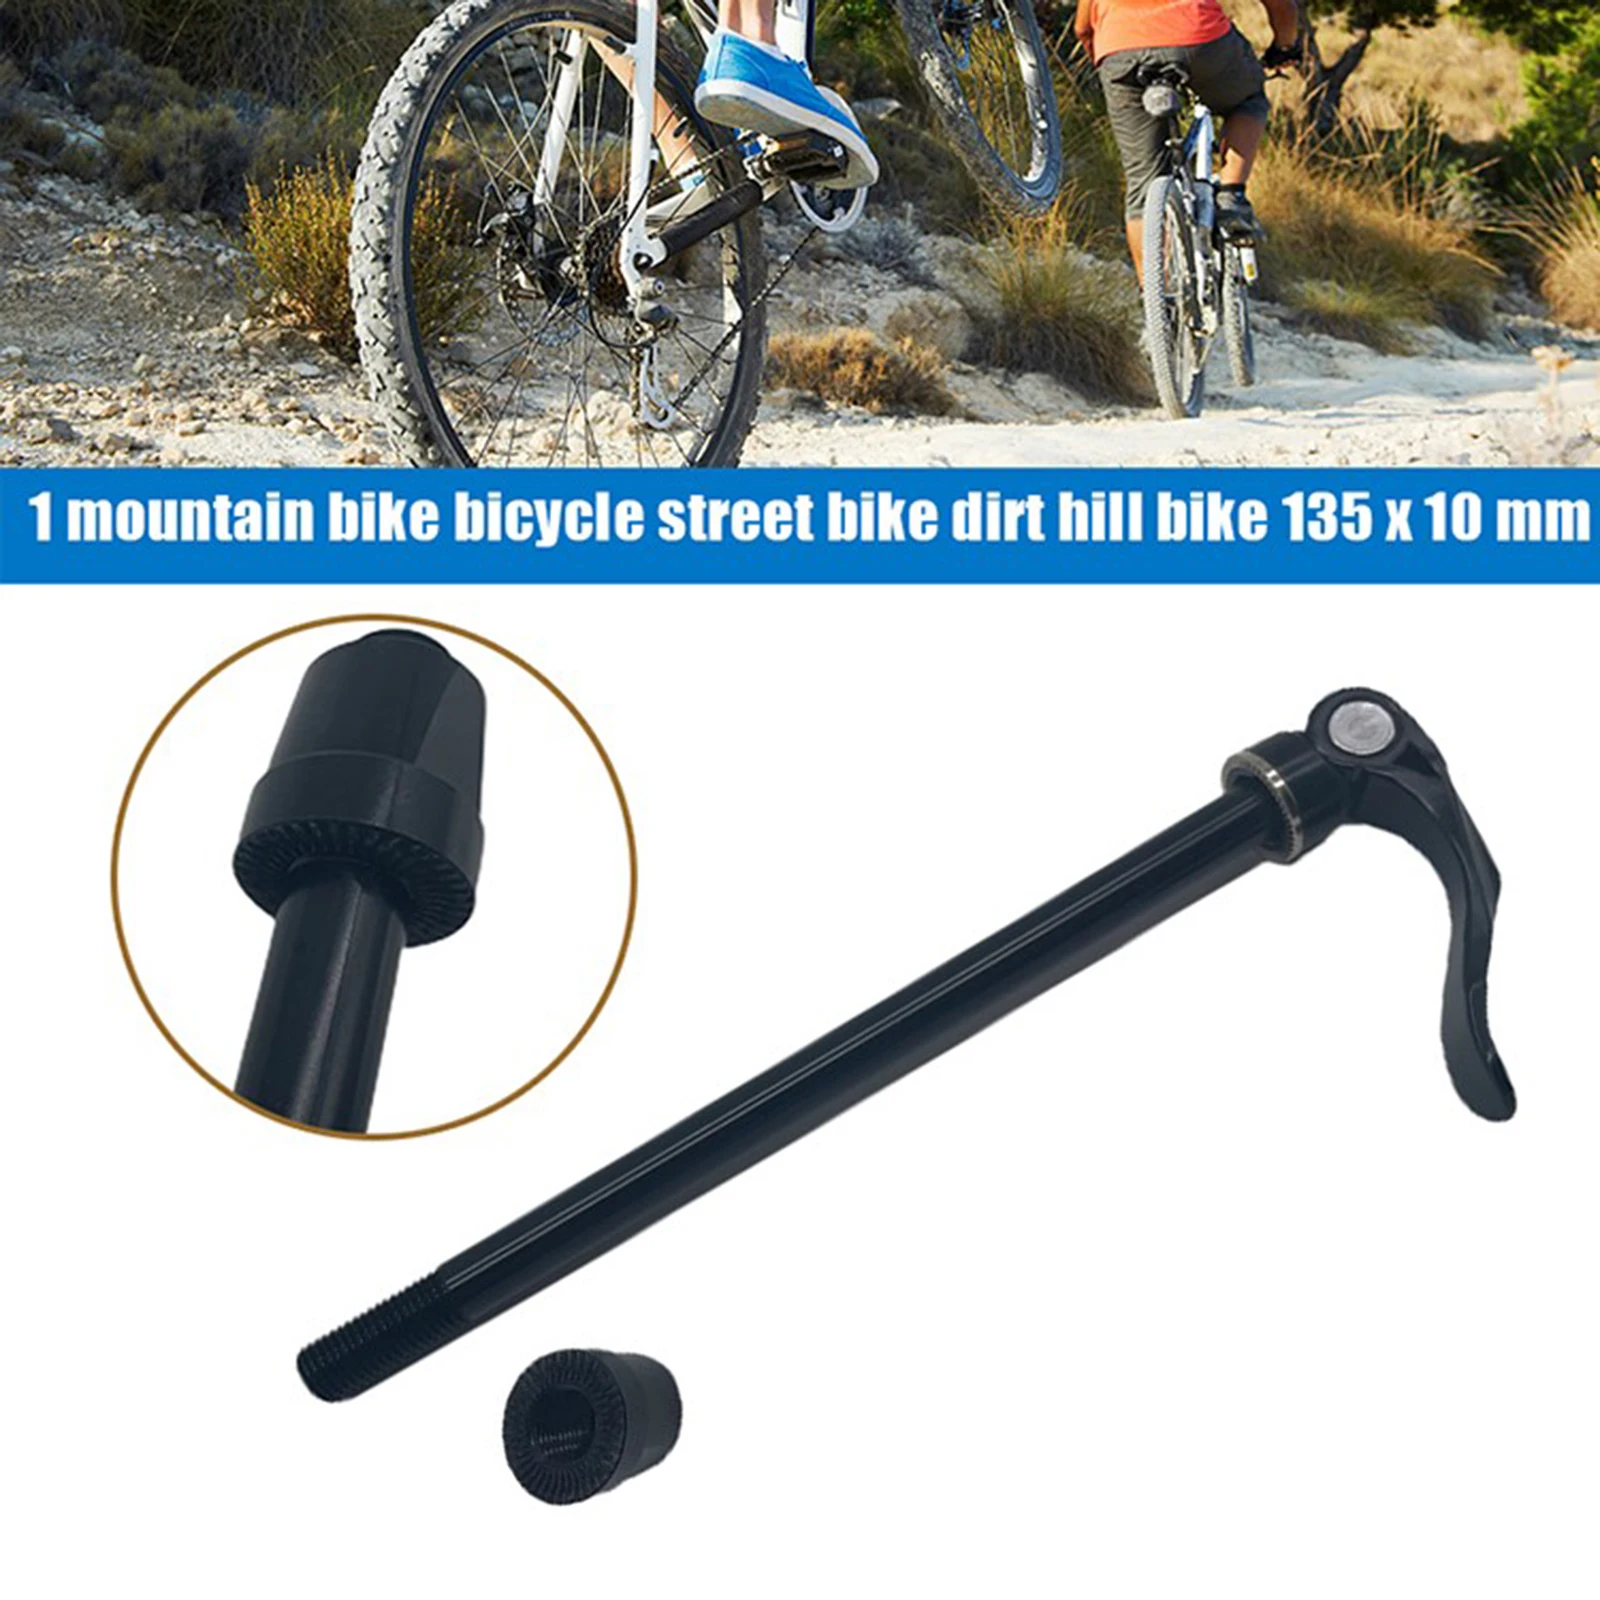 MTB Quick Release Rear Wheel Skewer for Trainer Bicycle Mountain Bike Back Wheel 135x10mm Hub Axle for Road MTB DH BMX